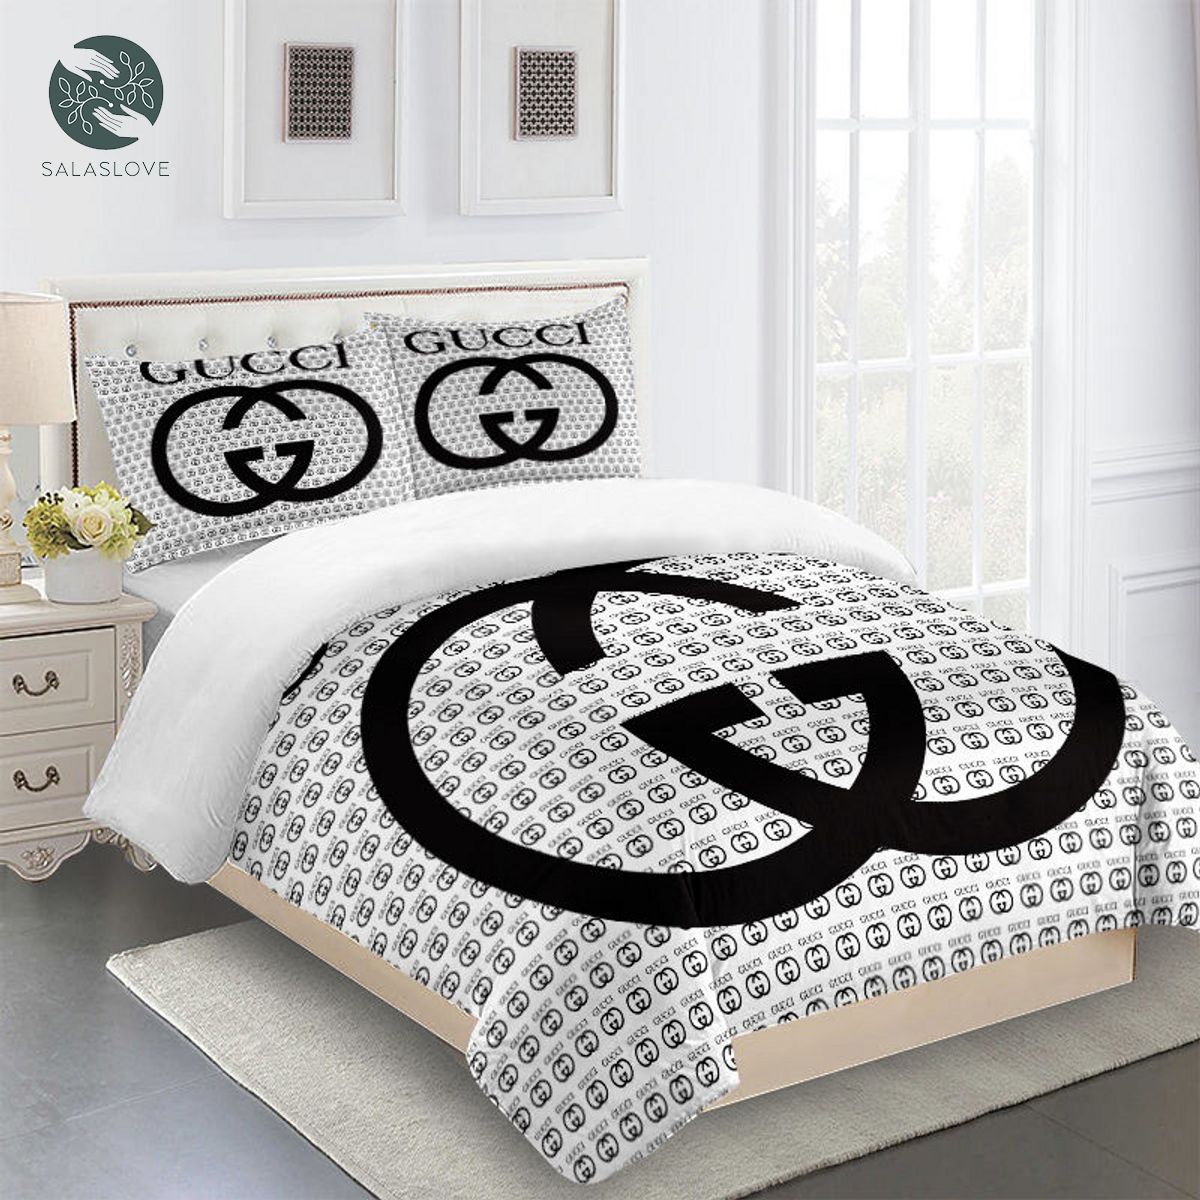 Gucci Bedding Set White And Black Luxury Bed Sheets